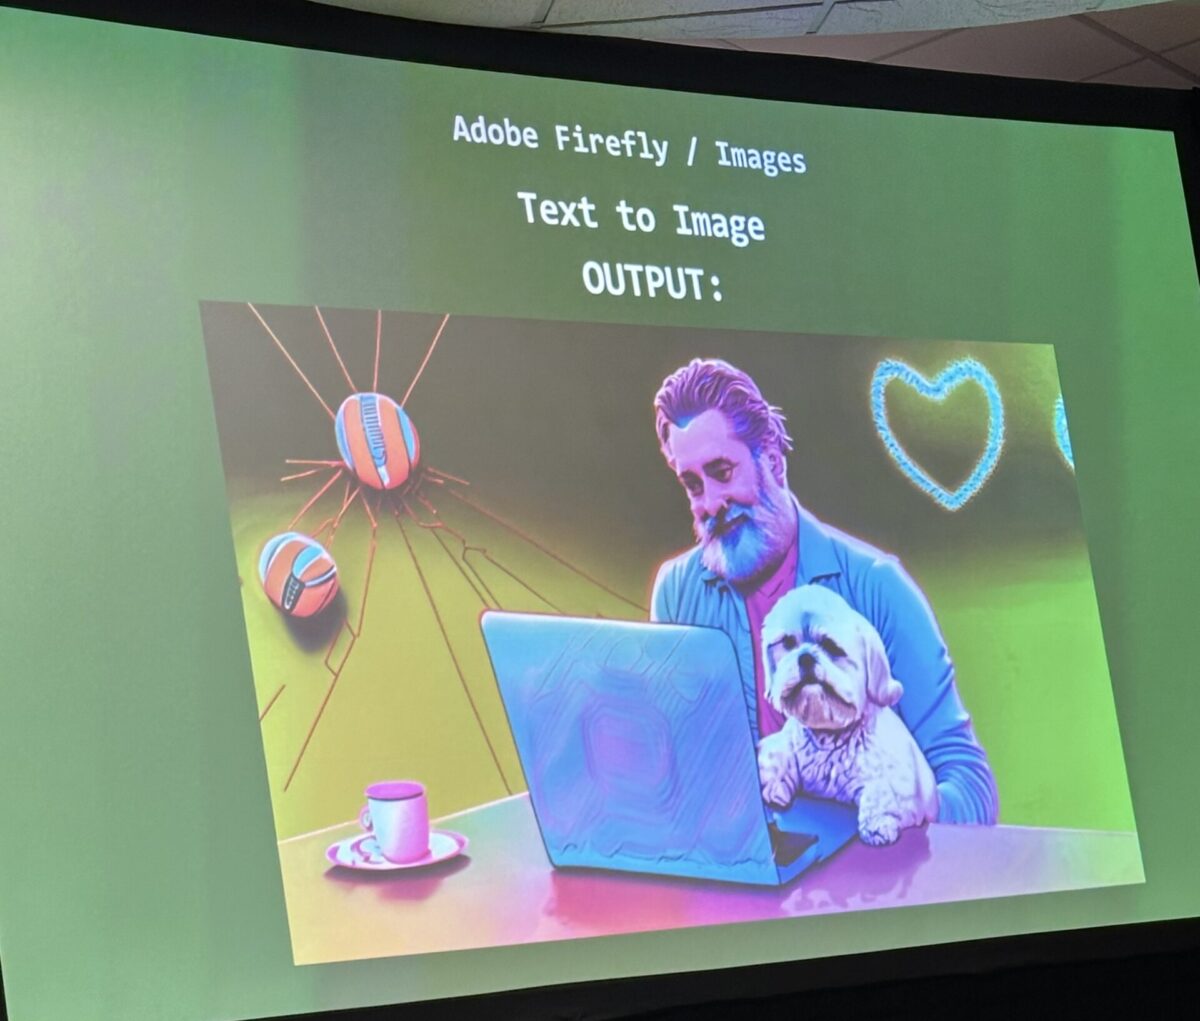 image of projector screen of a slide with an AI image of presenter: man with beard holding dog at a laptop with coffee on table